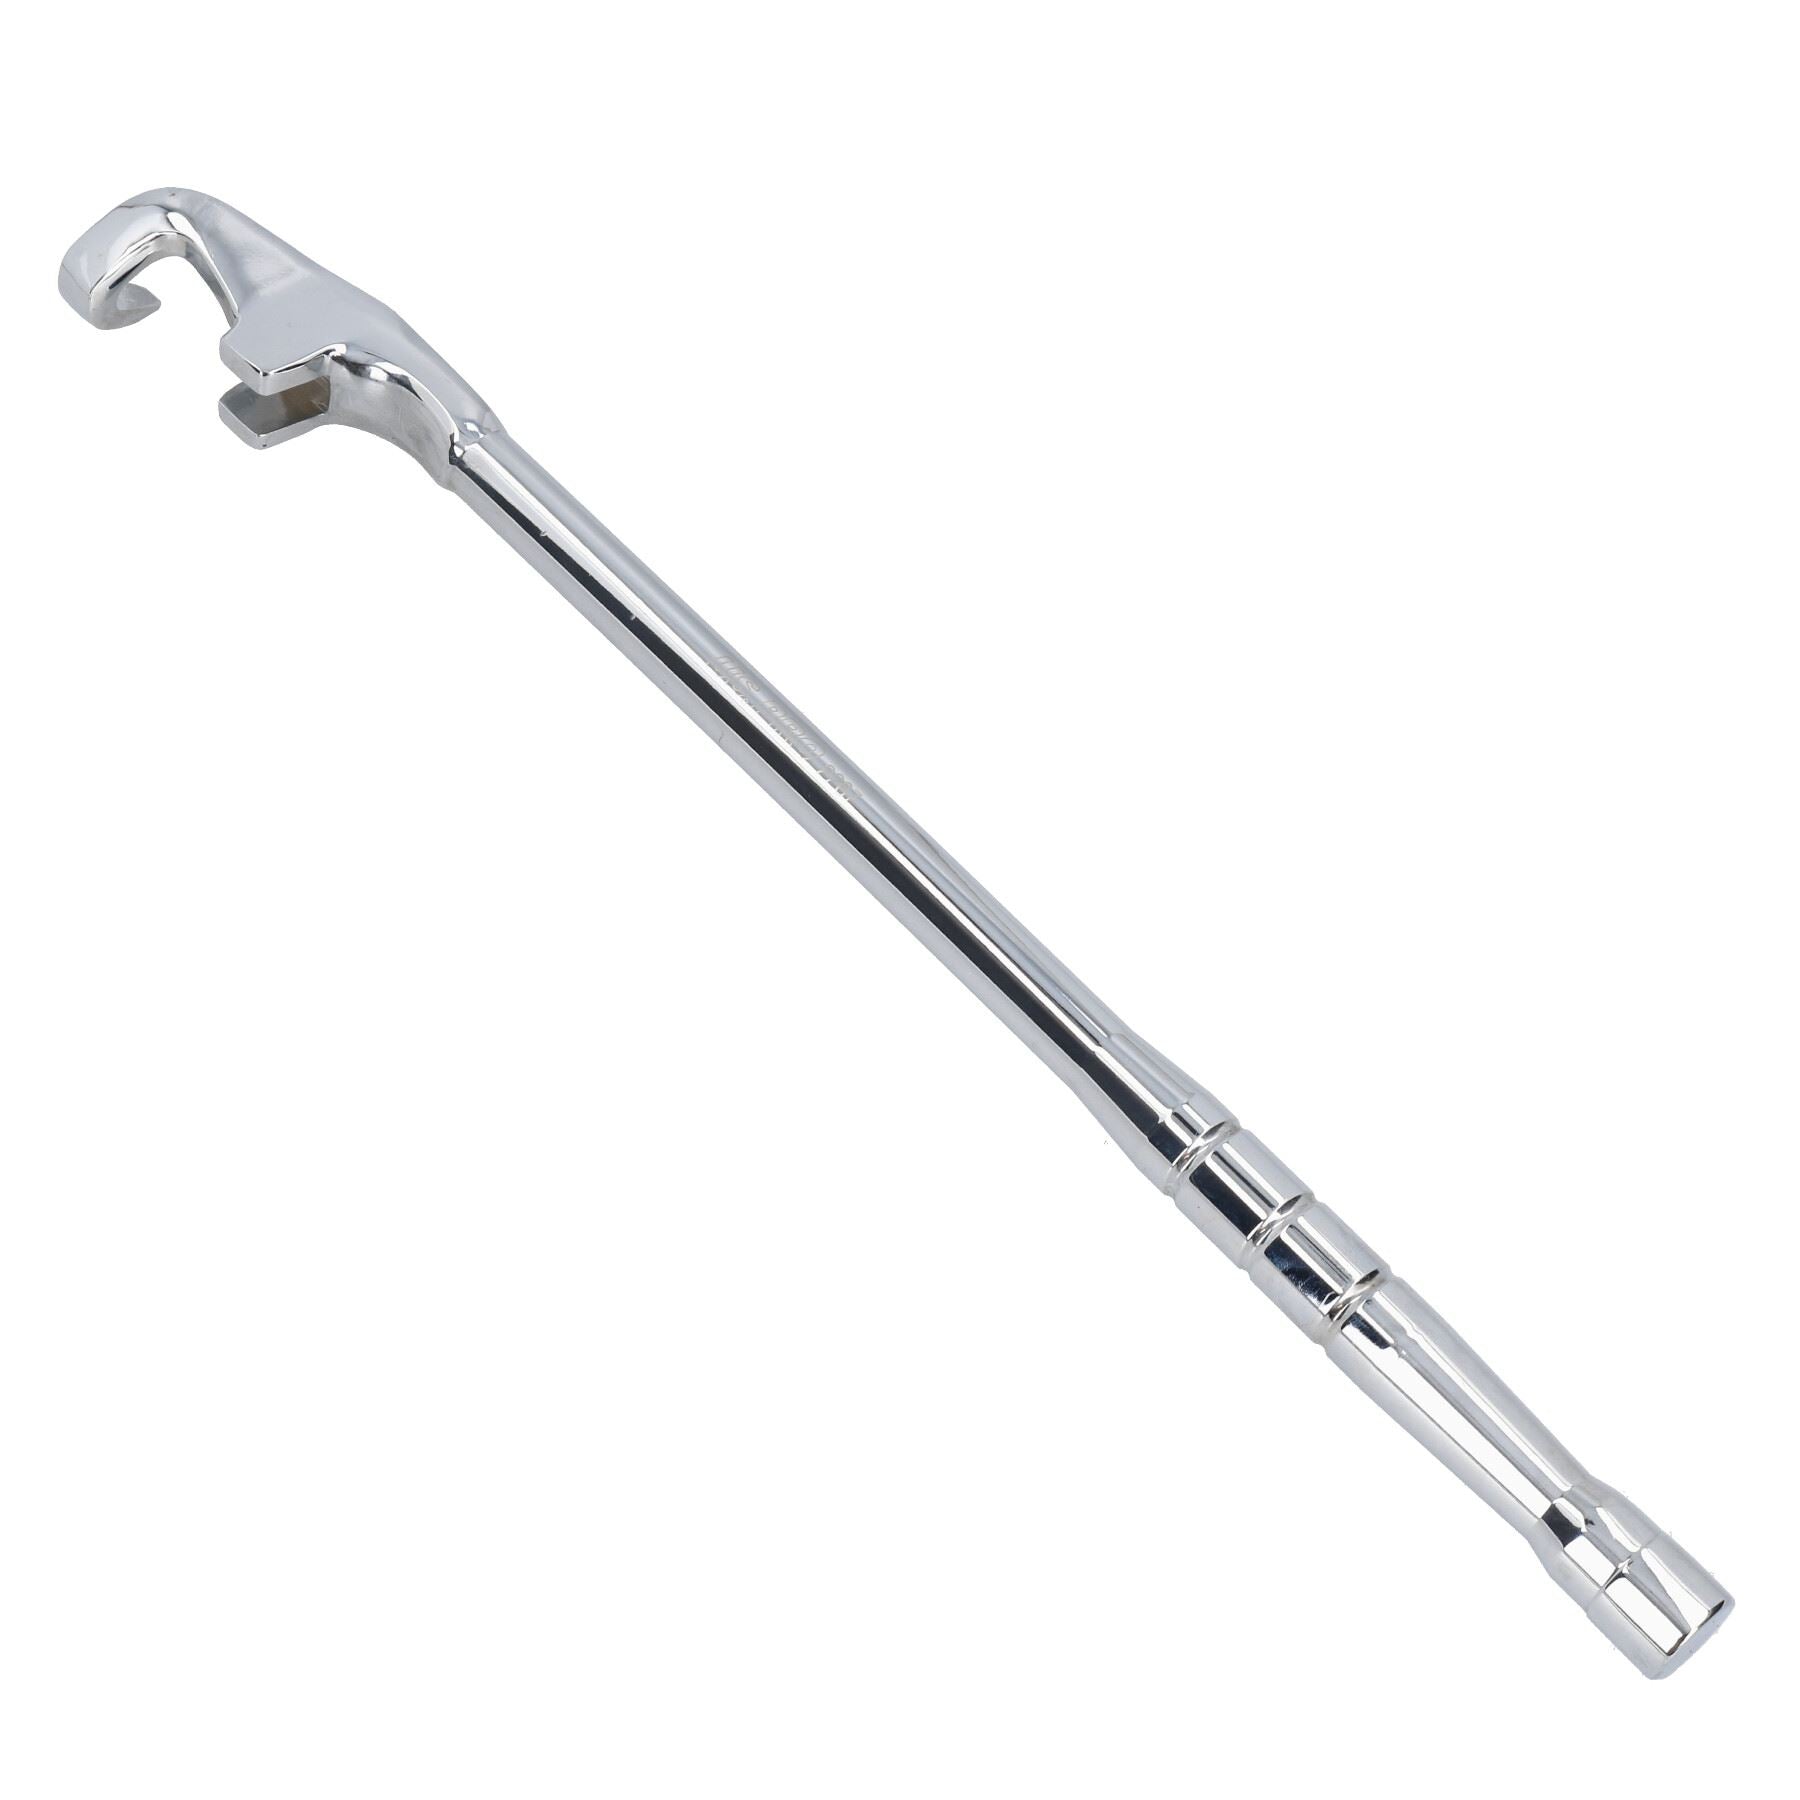 Universal Spanner Wrench Extension Tool Power Bar Wrench Total Length 385mm